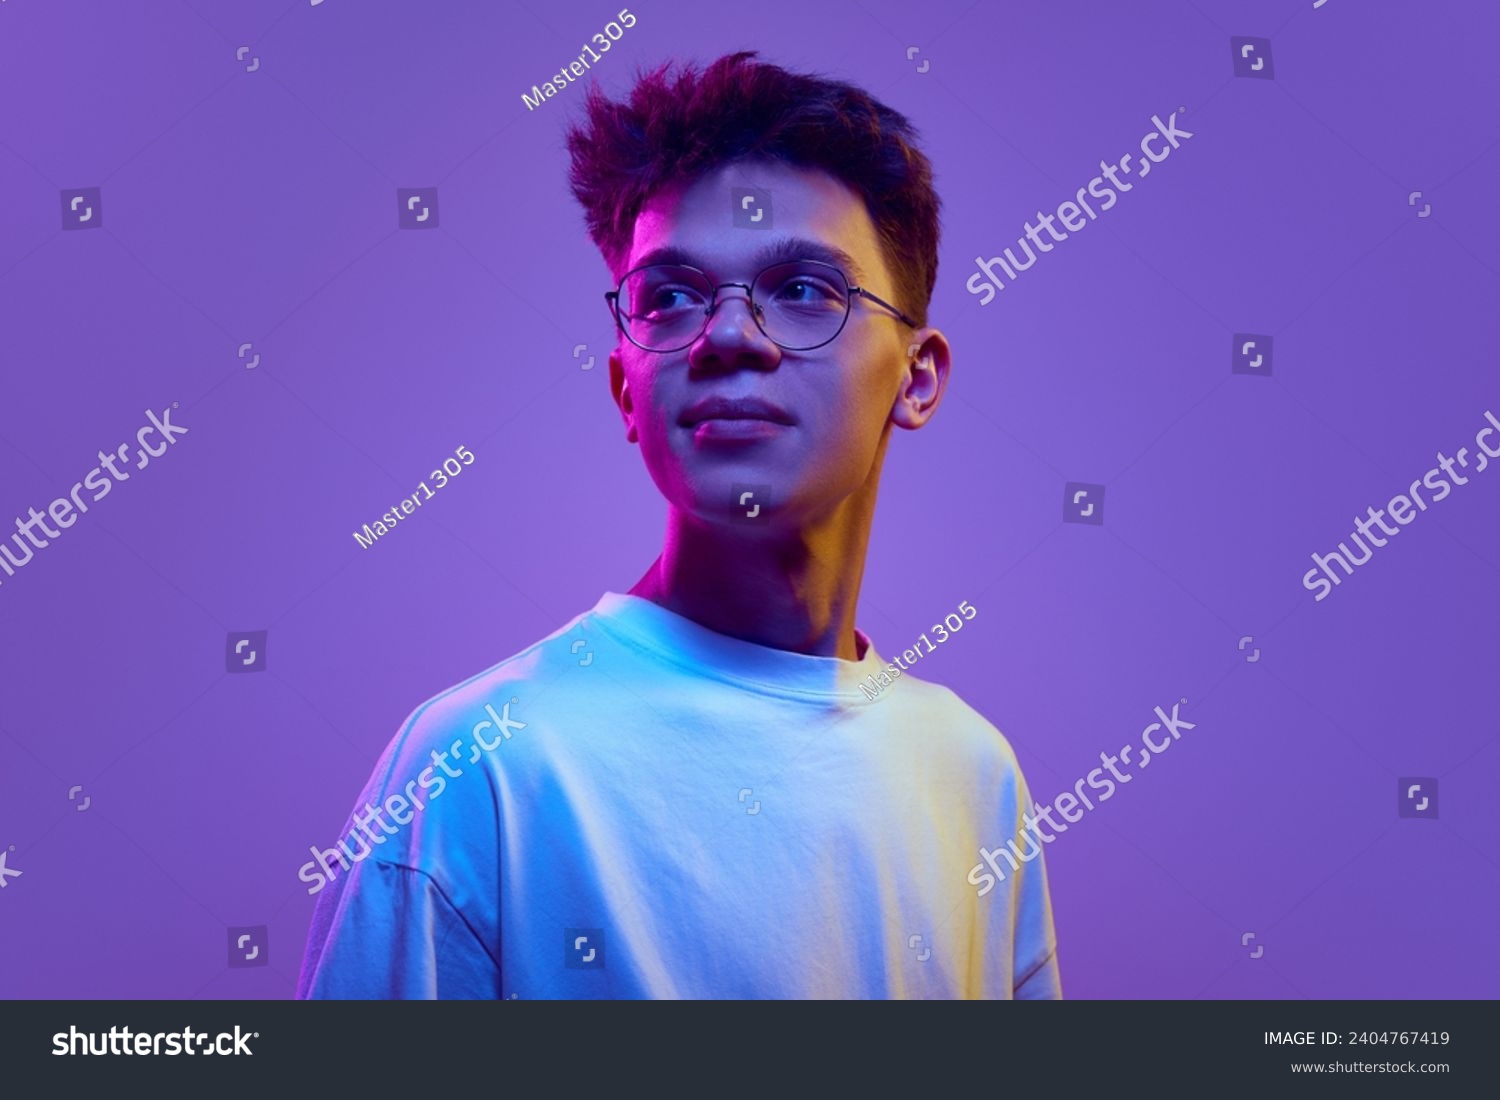 Portrait of smiling young man, boy in casual white t-shirt and sunglasses looking away against purple background in neon light. Relaxed look. Concept of human emotions, youth, education, lifestyle, ad #2404767419